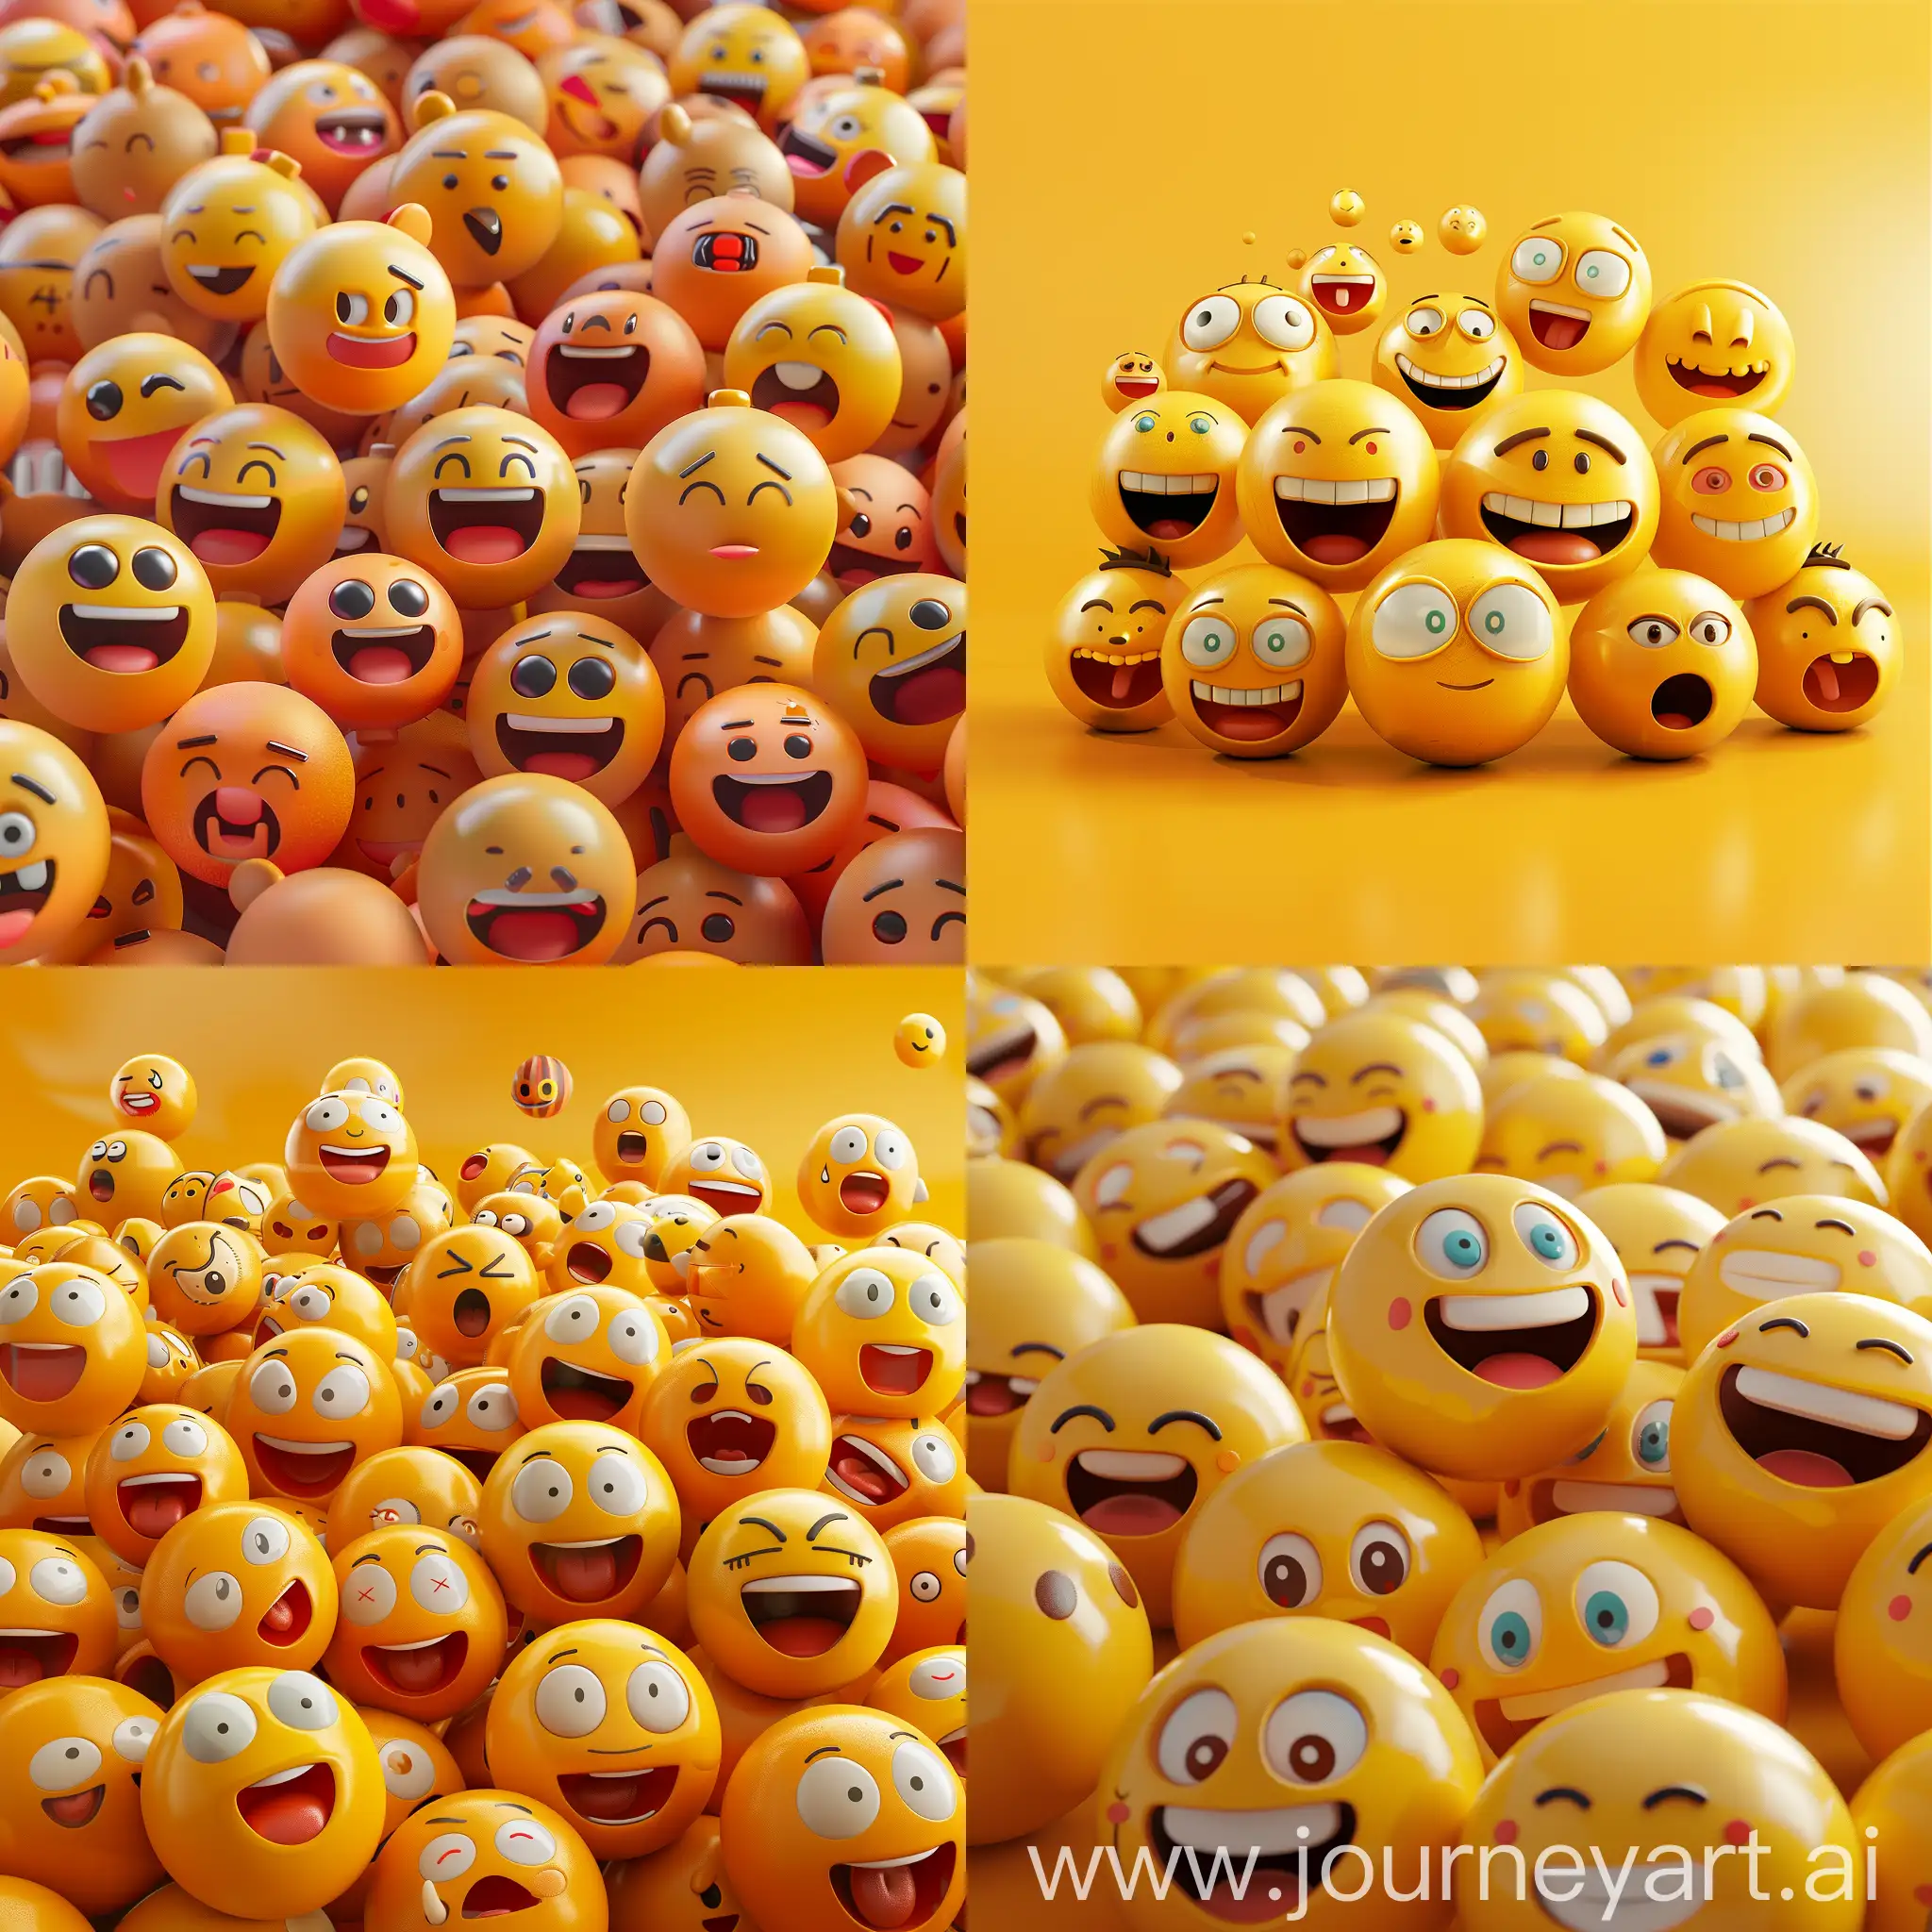 Colorful-3D-Emoji-Banner-Modernized-Advertisement-with-Cool-Emojis